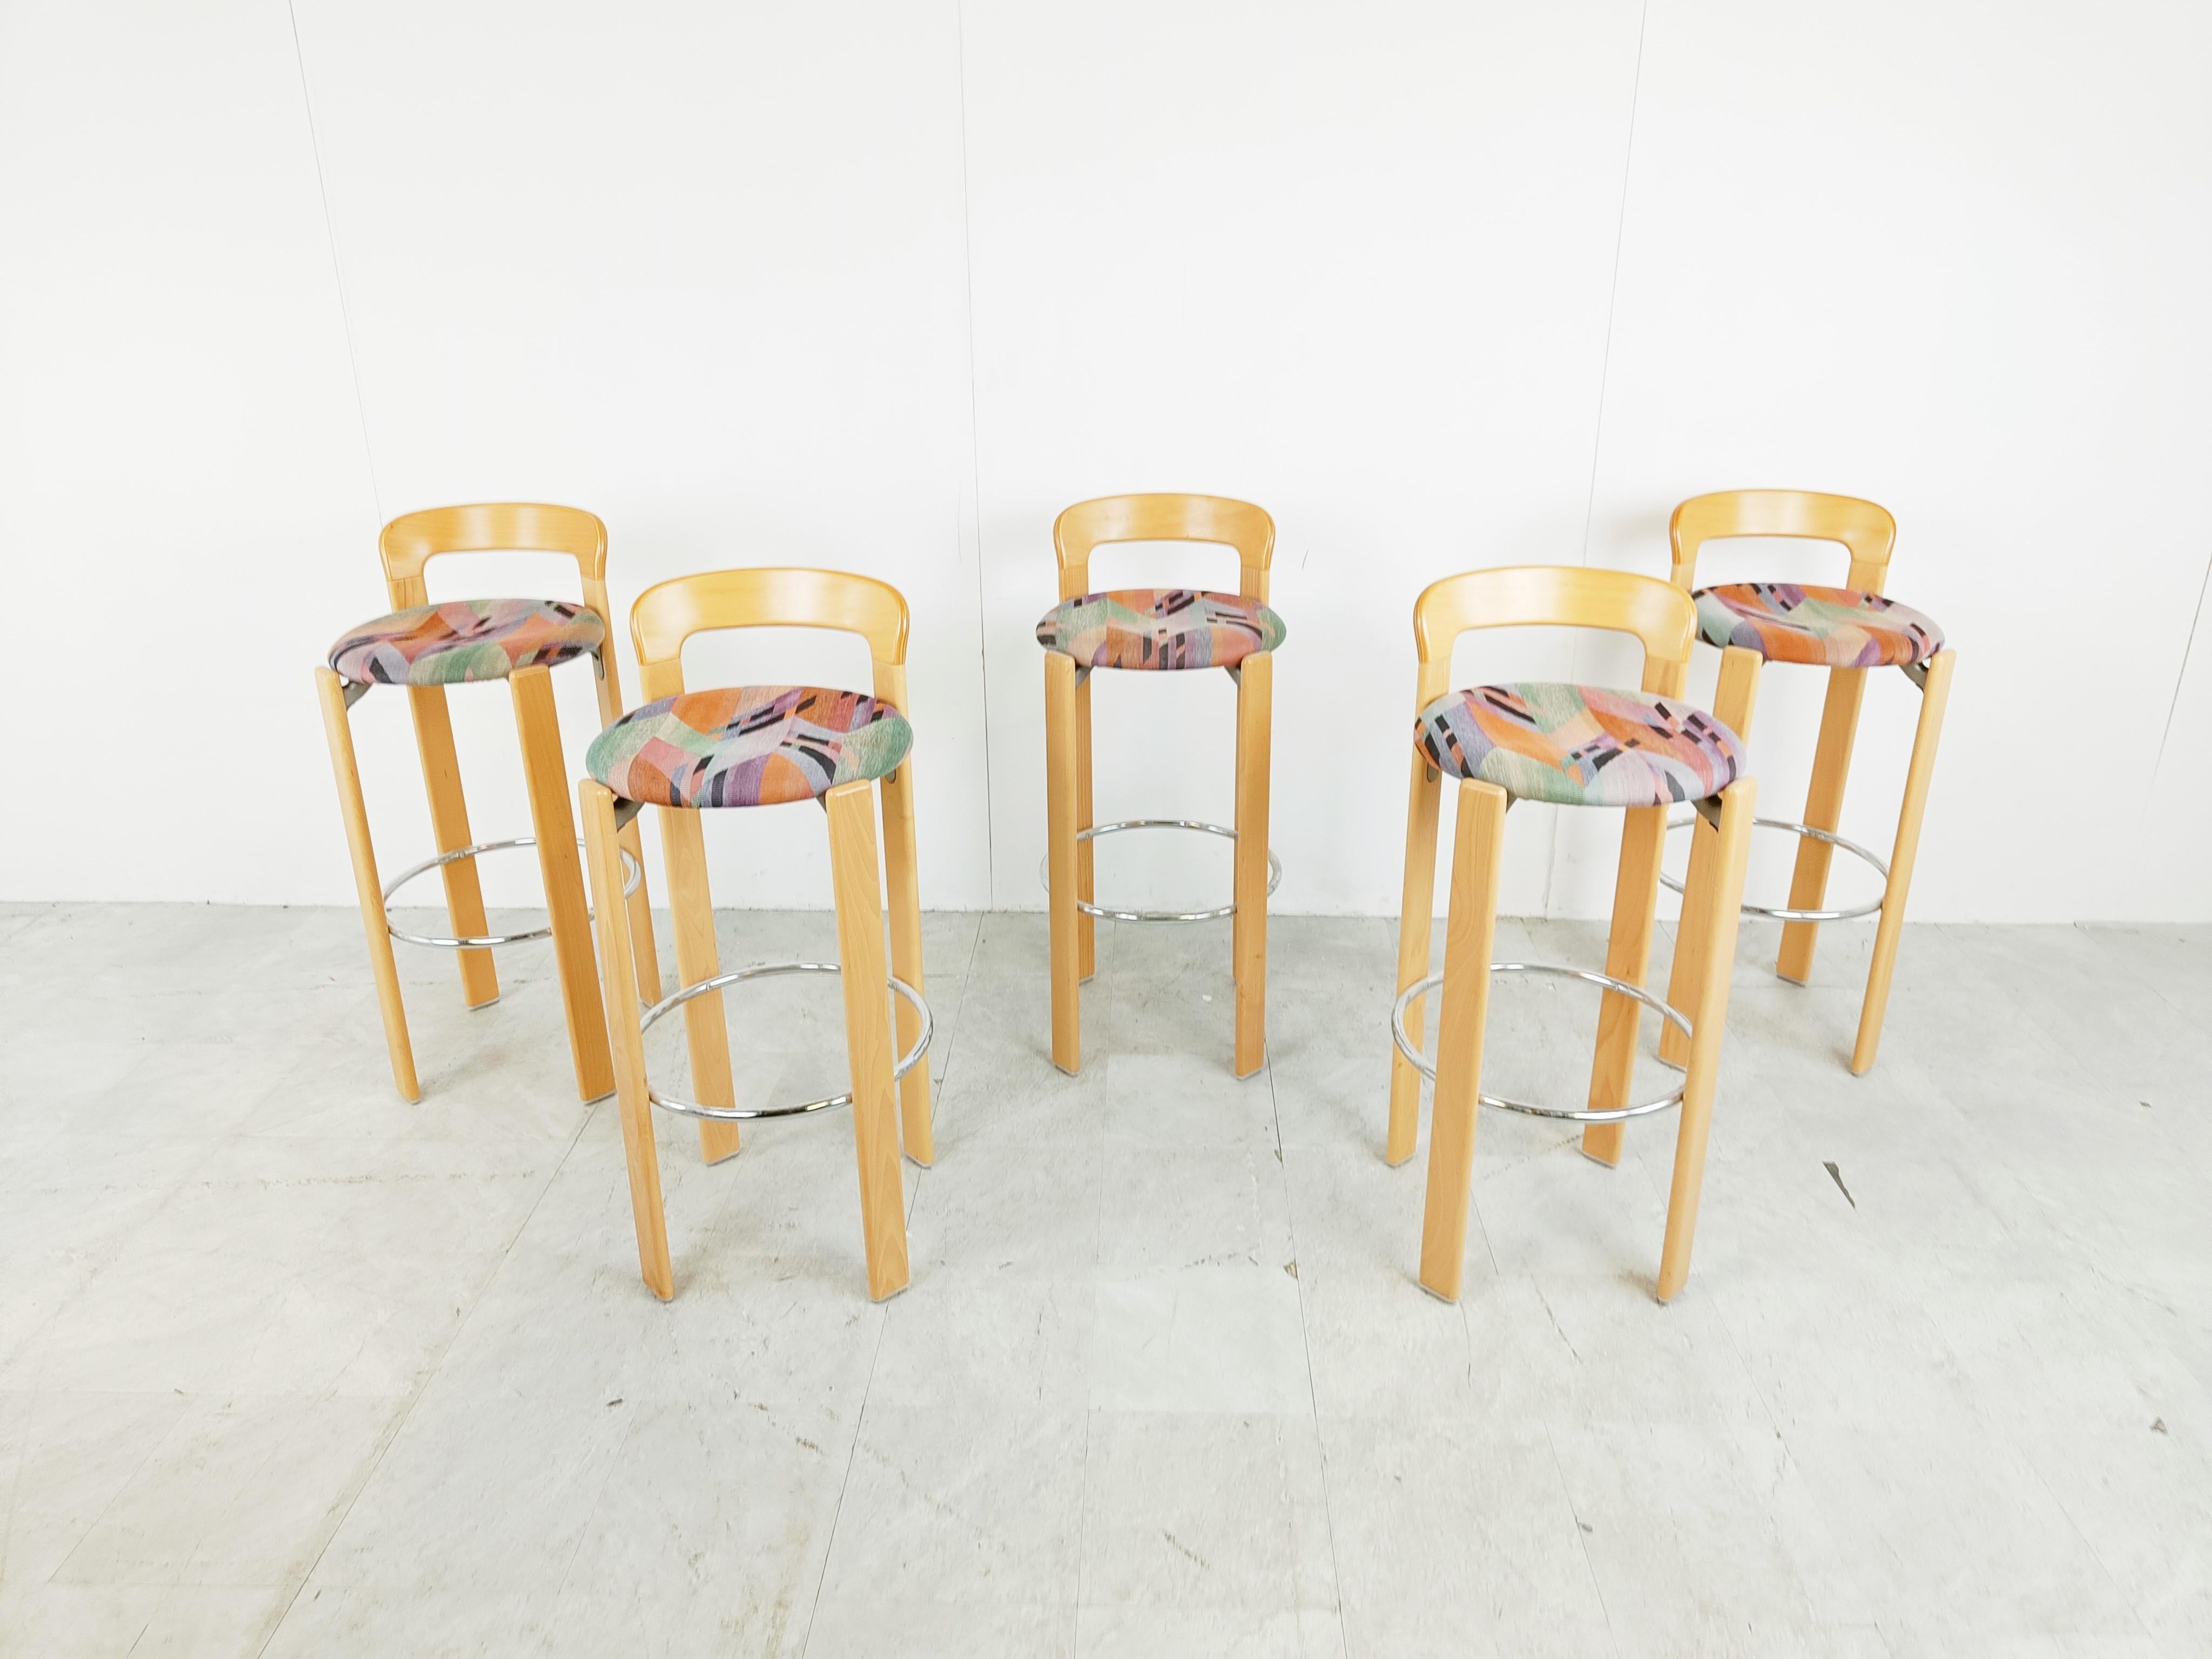 Vintage beech wooden bar stools designed by Swiss designer Bruno Rey for Kush & co

Timeless design.

Very good condition with their original 1980s fabric.

1980s - Switzerland

Dimensions:
Height: 100cm/39.37